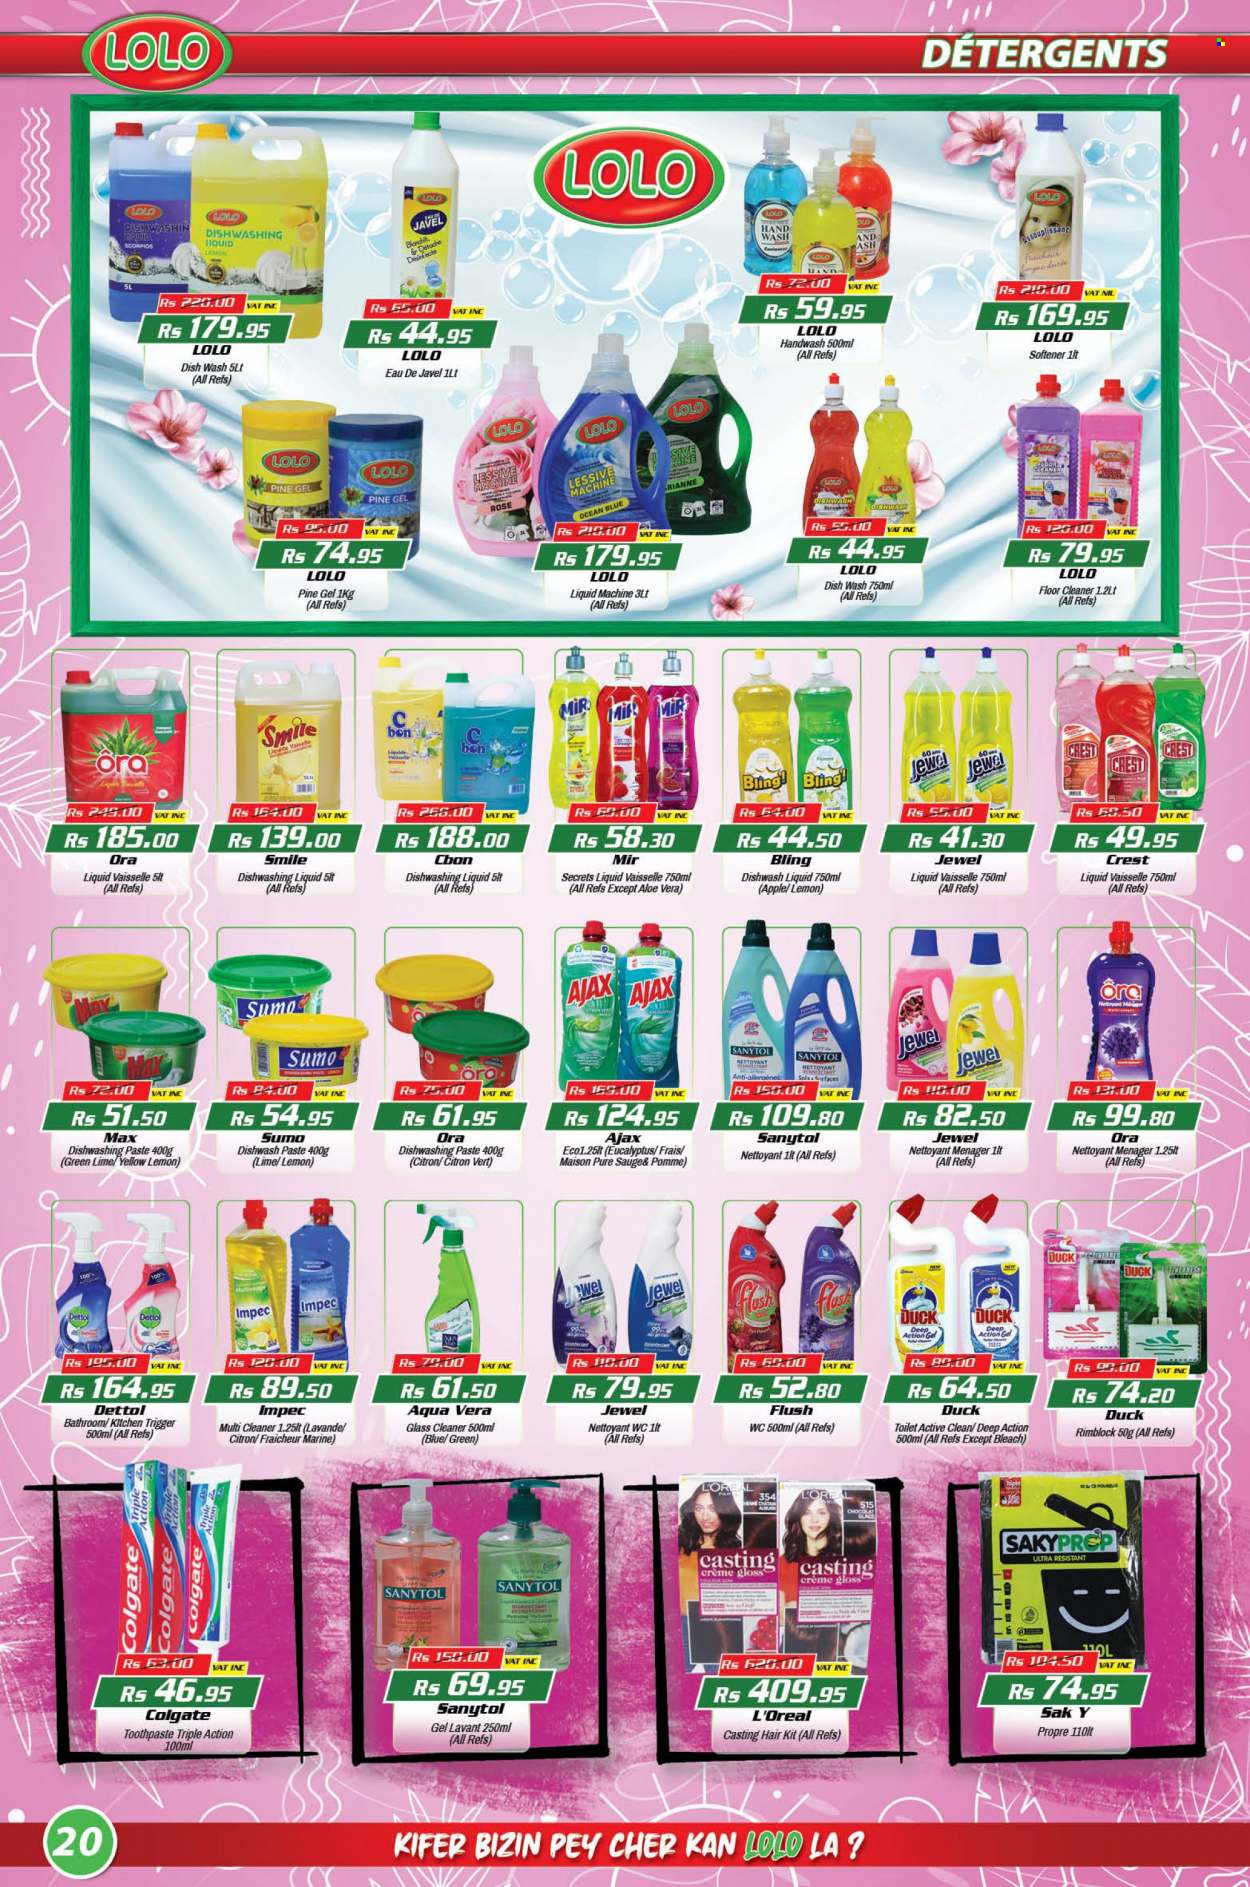 thumbnail - LOLO Hyper Catalogue - 26.08.2022 - 15.09.2022 - Sales products - wine, rosé wine, cleaner, bleach, floor cleaner, glass cleaner, Ajax, fabric softener, dishwashing liquid, hand wash, toothpaste, Crest, L’Oréal, Apple, rose, Colgate, Dettol, Sanytol, desinfection. Page 20.